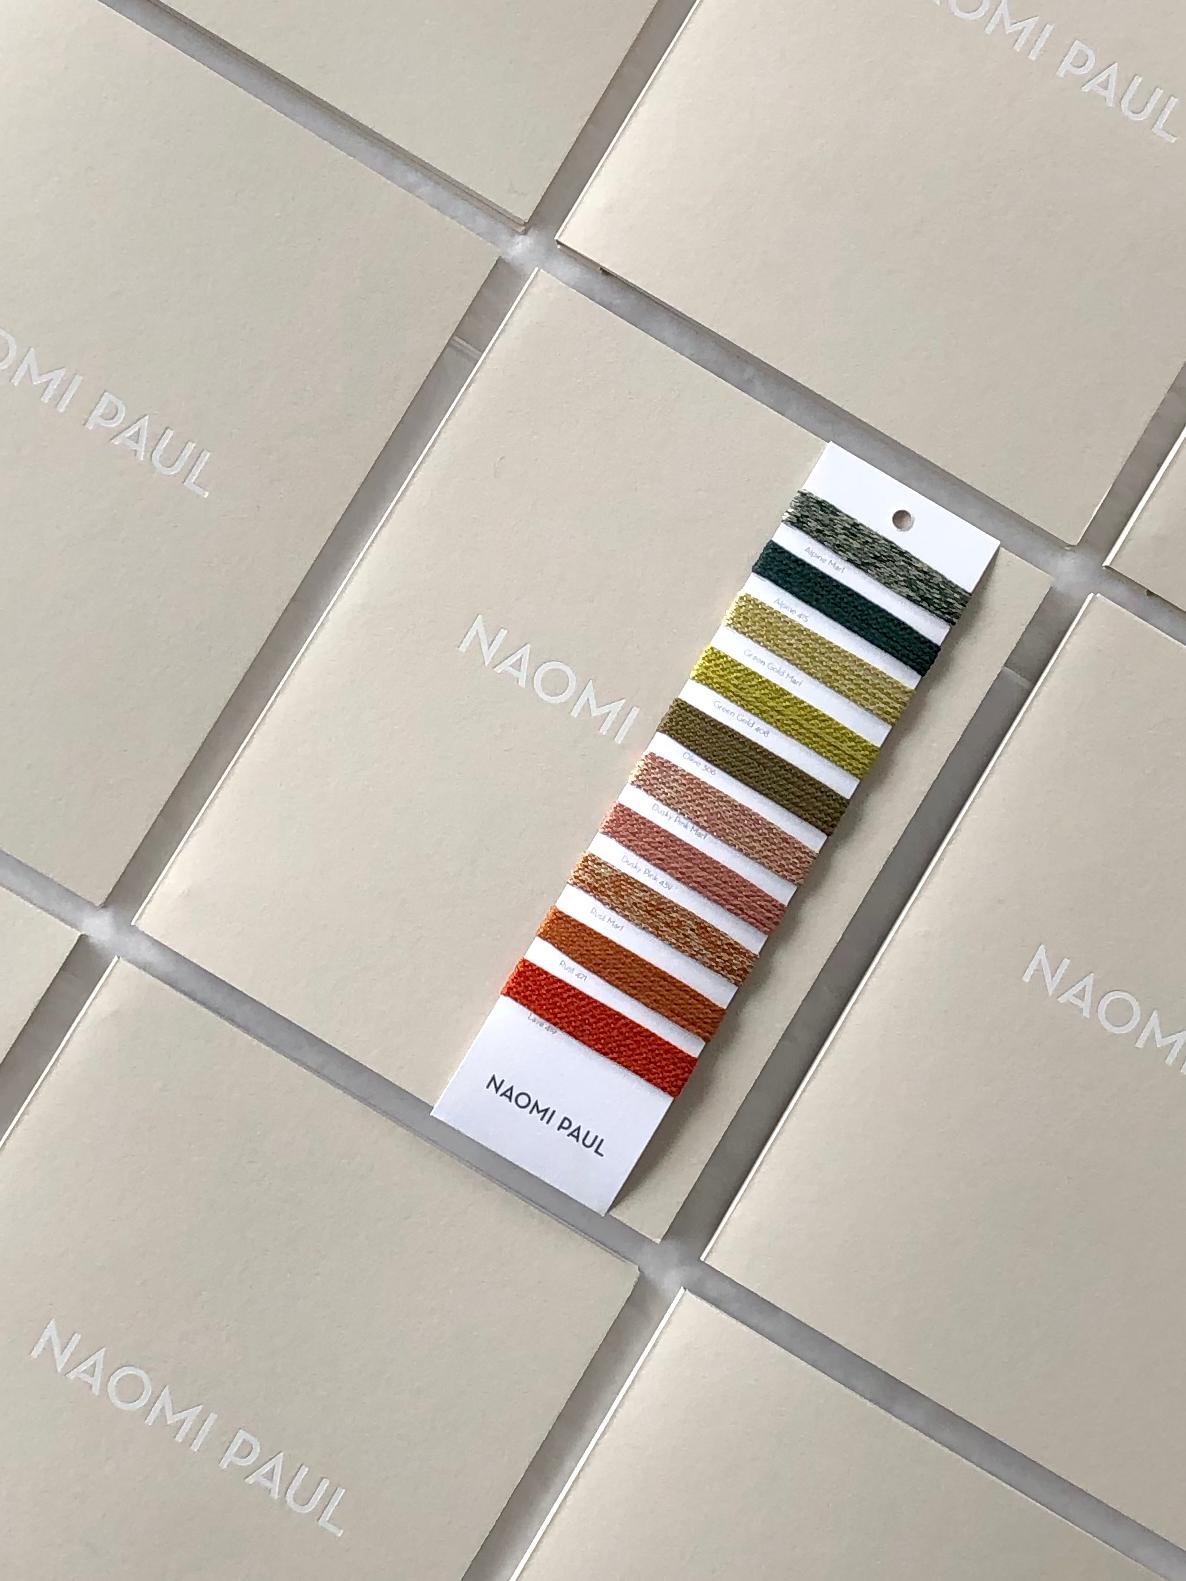 Naomi Paul lighting collection book and full color collection swatch card.